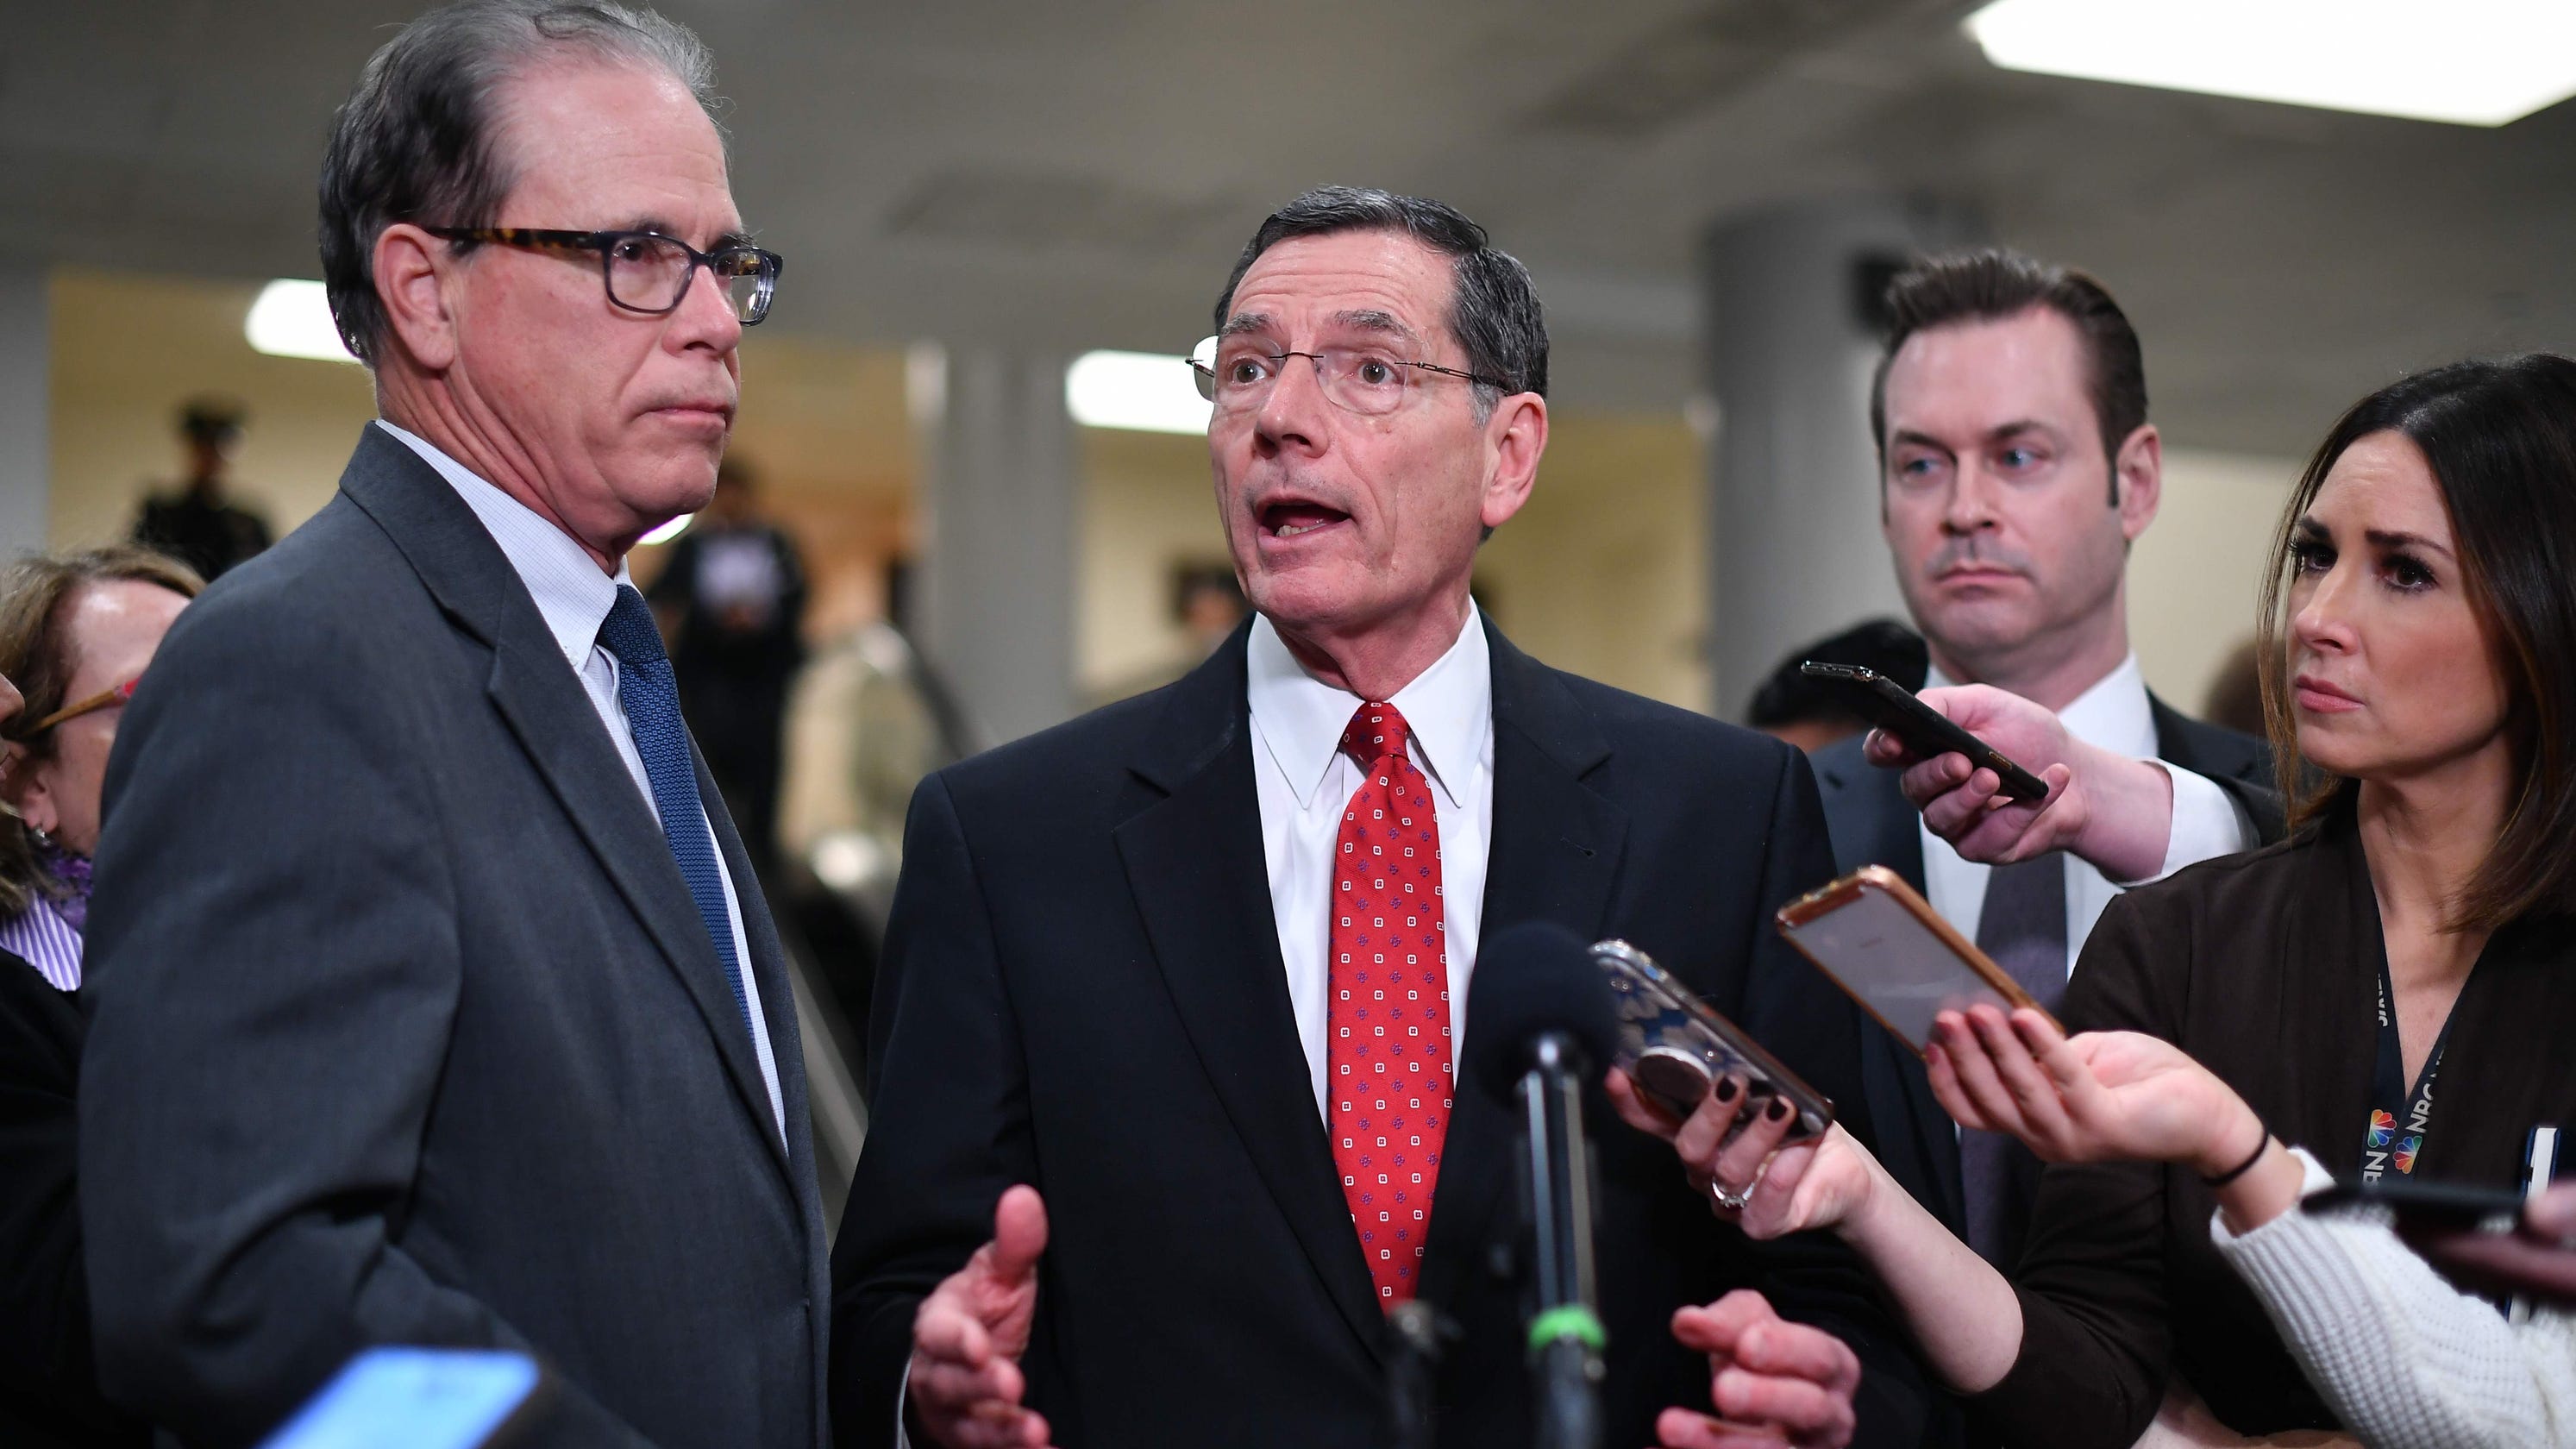 Climate solutions include free-market innovation, not taxation: Sen. John Barrasso